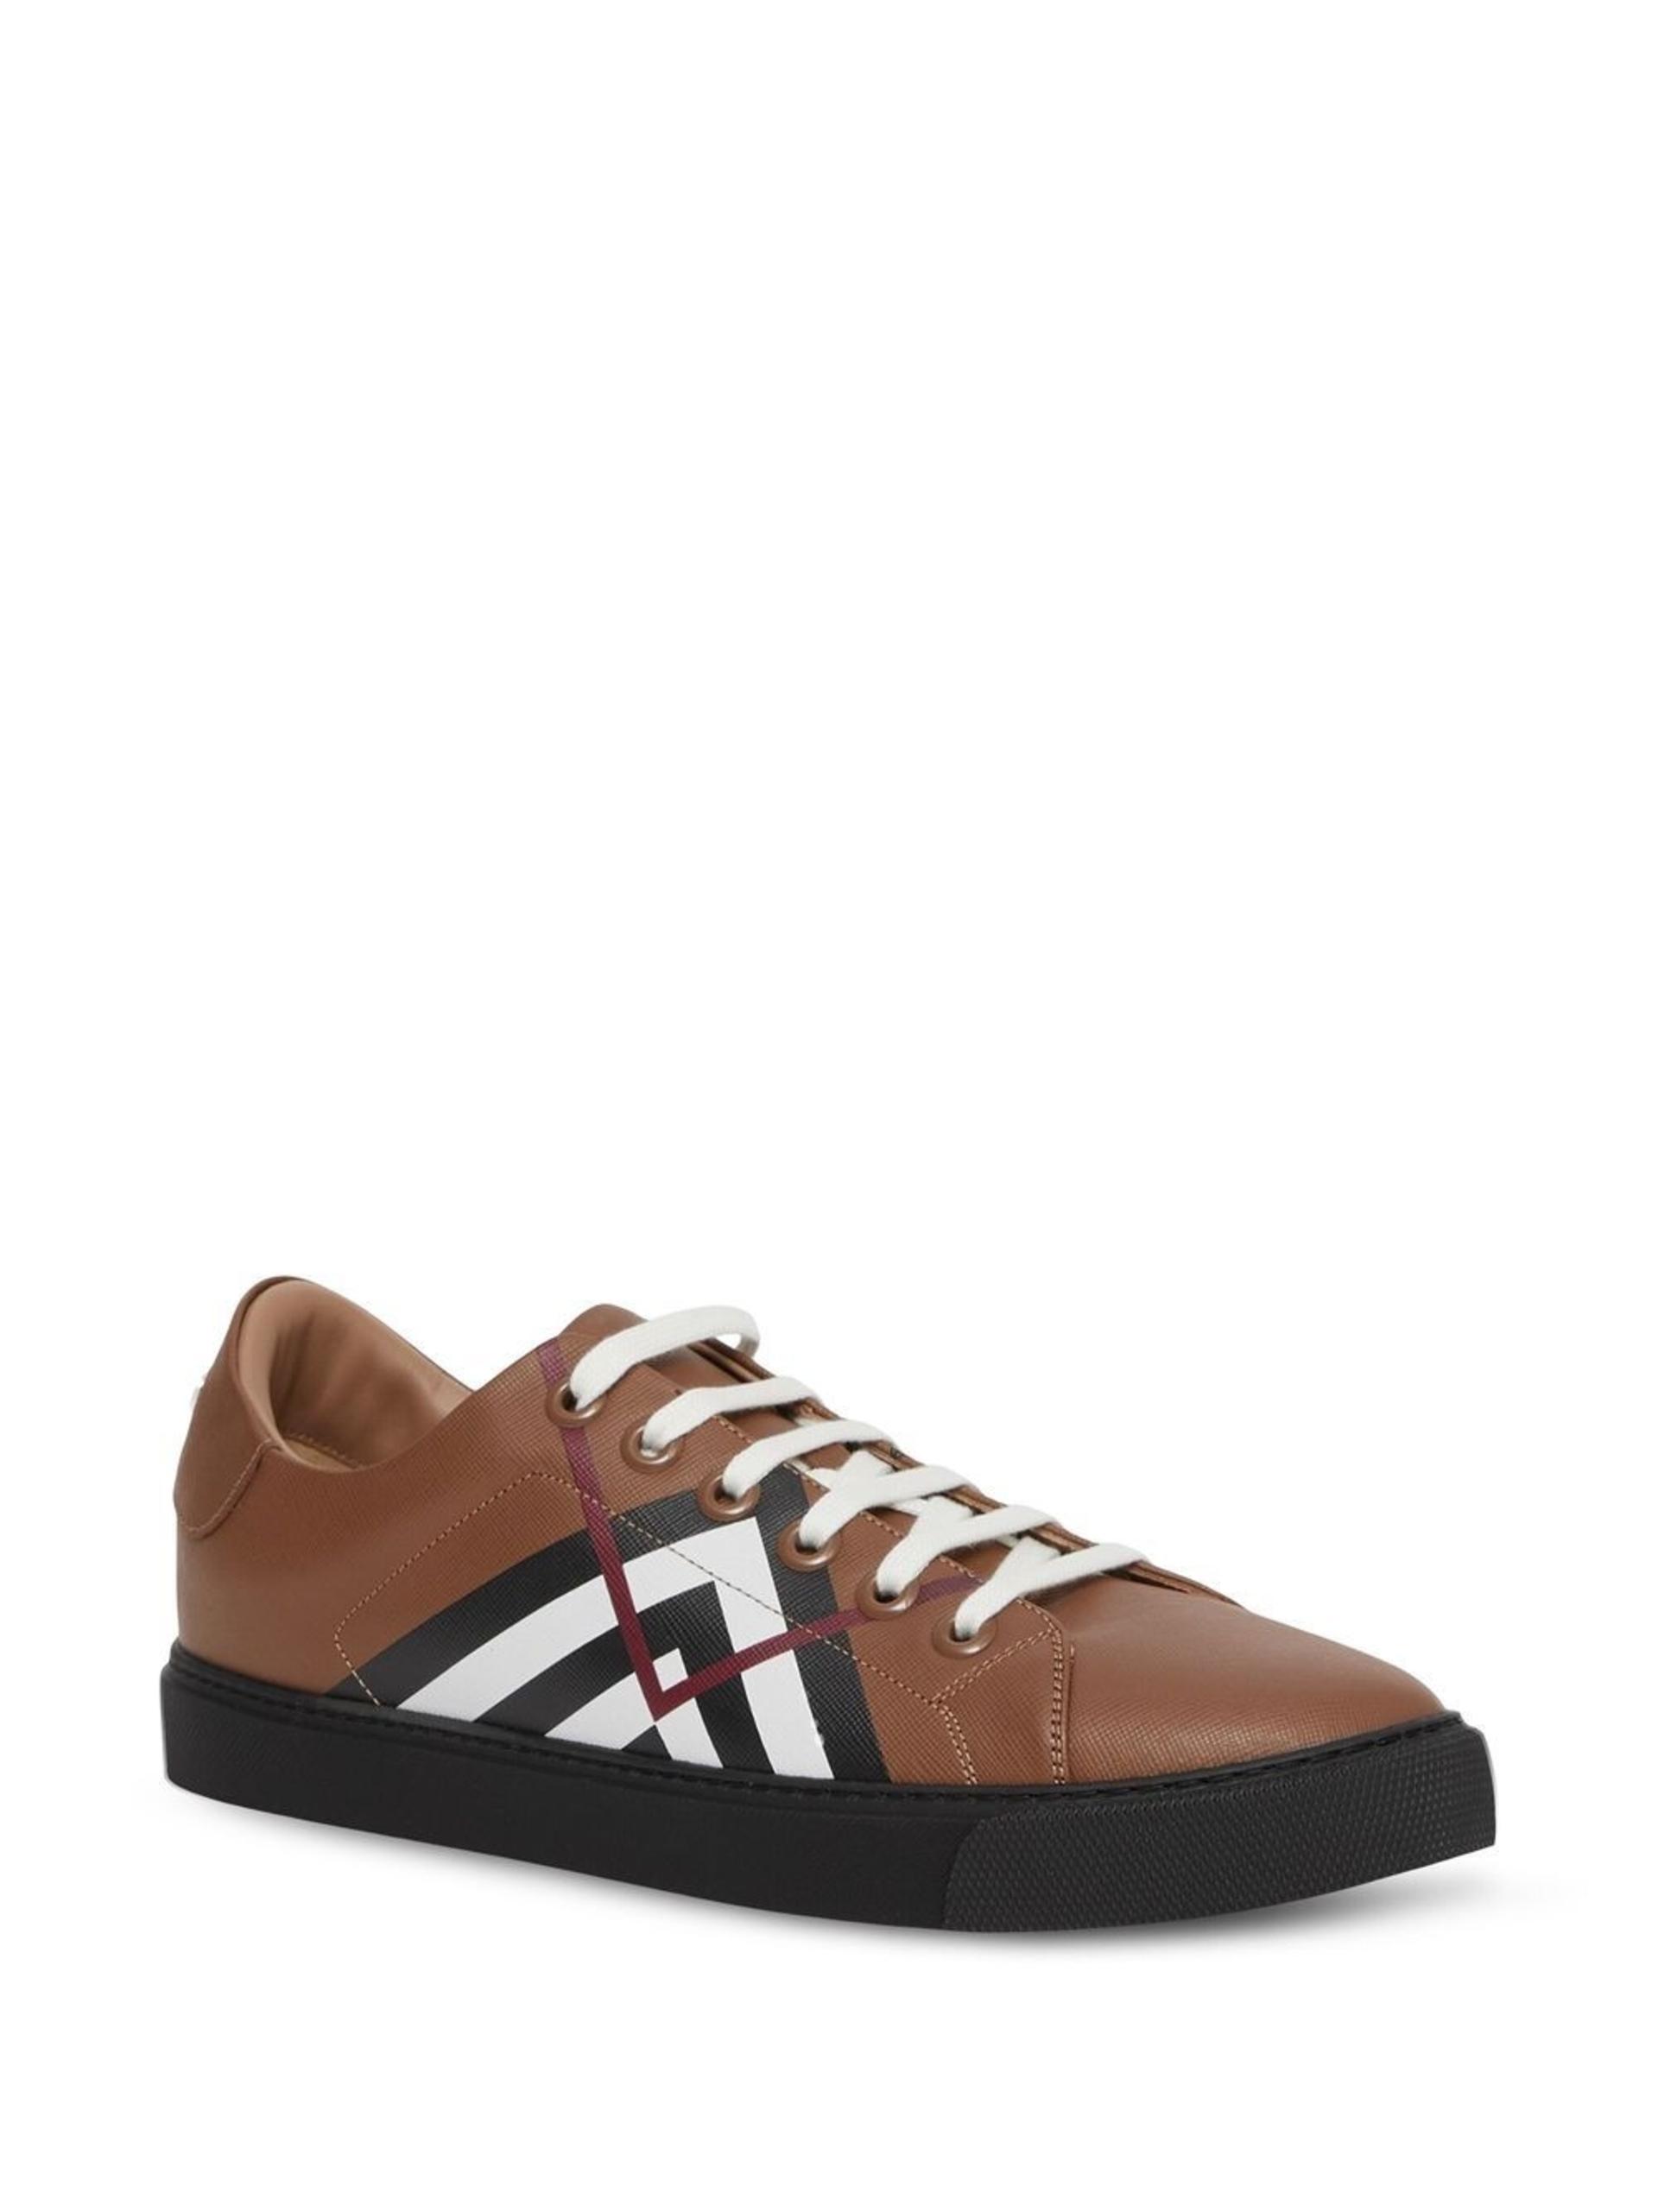 Burberry Chevron Check Low-top Sneakers in Brown | Lyst